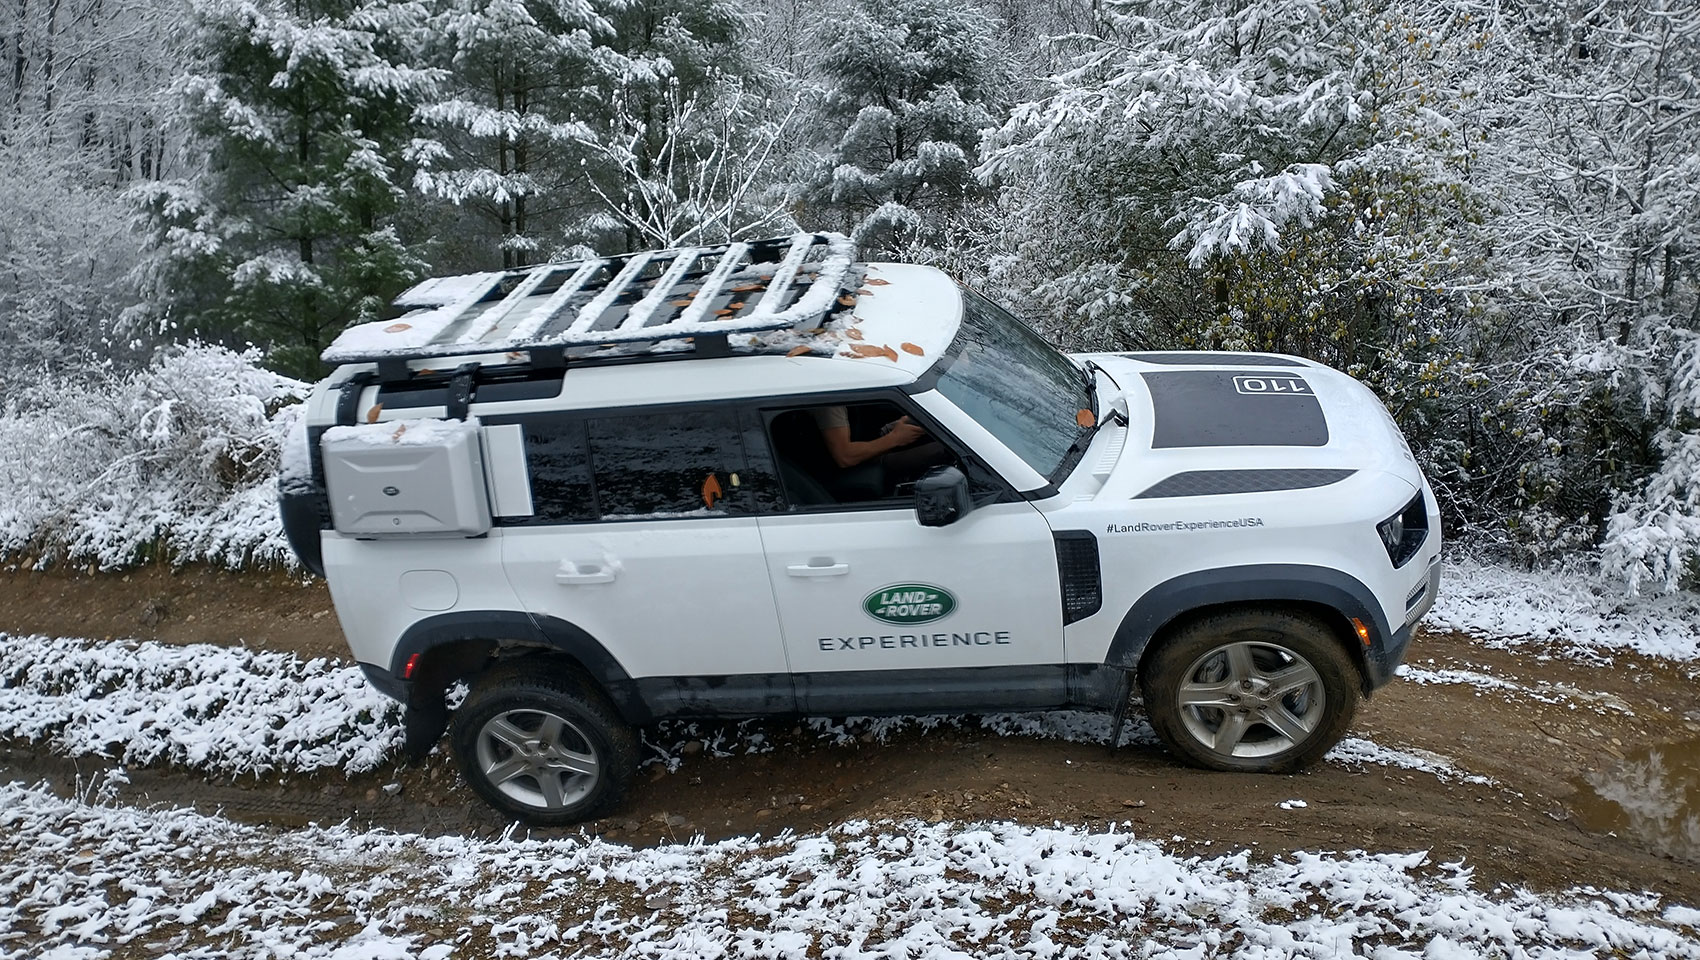 Land Rover Defender on a muddy, snowy trail